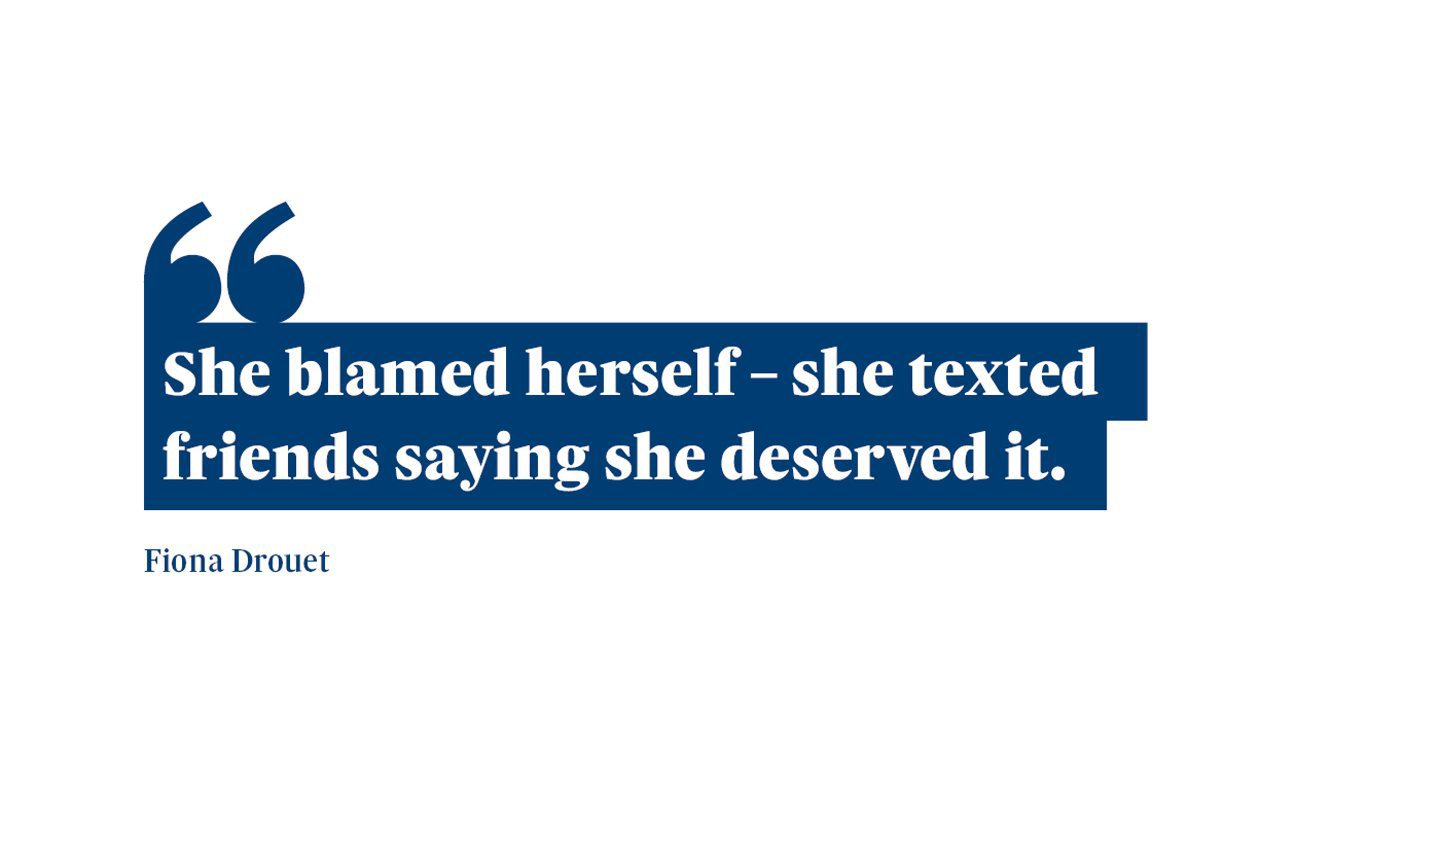 A quote from Fiona Drouet saying: “She blamed herself – she texted friends saying she deserved it.”